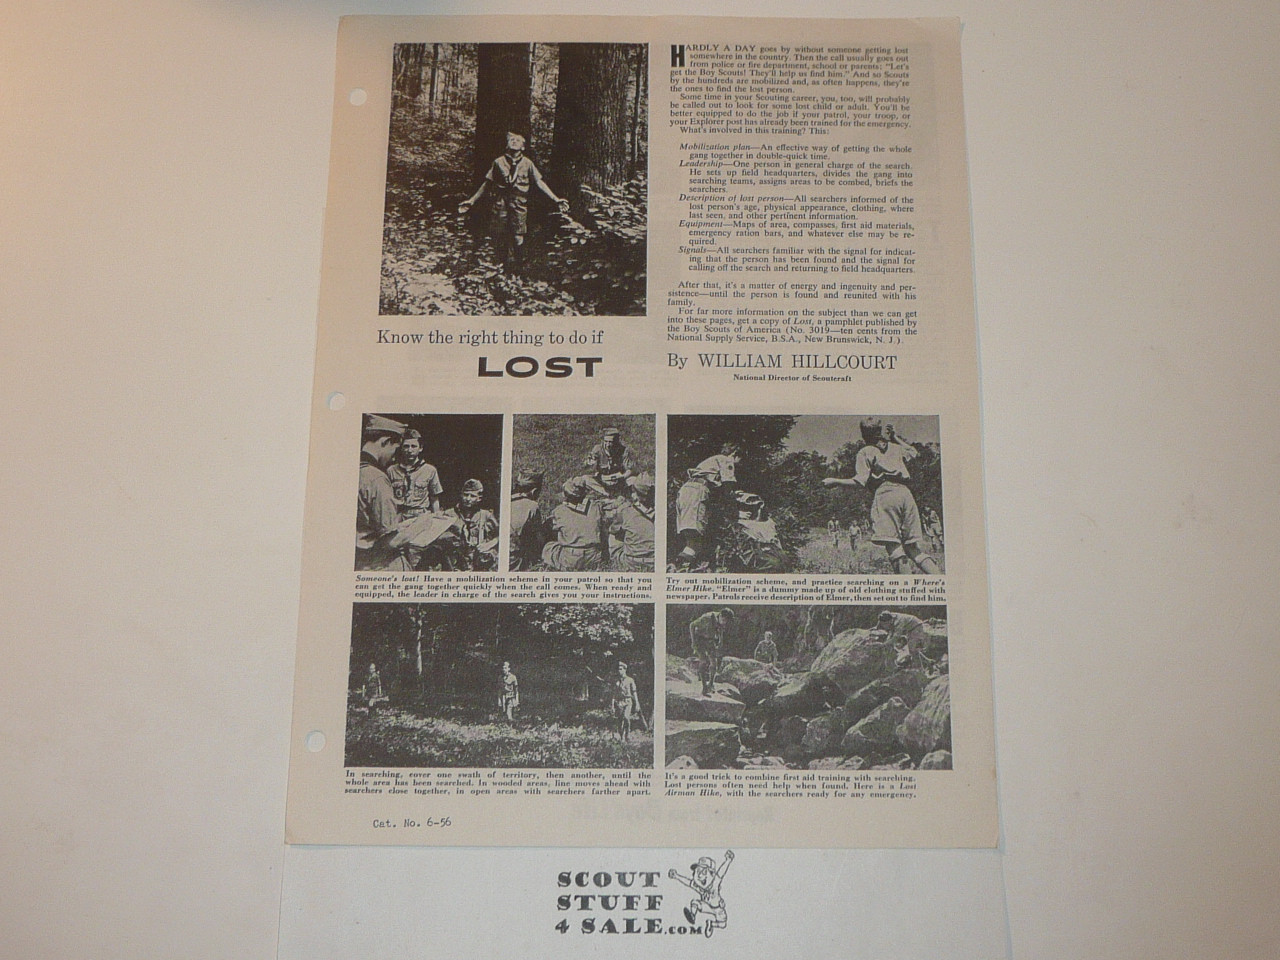 LOST, By Green Bar Bill, Boys' Life Single Topic Reprint from the 1950's - 1960's , written for Scouts, great teaching materials